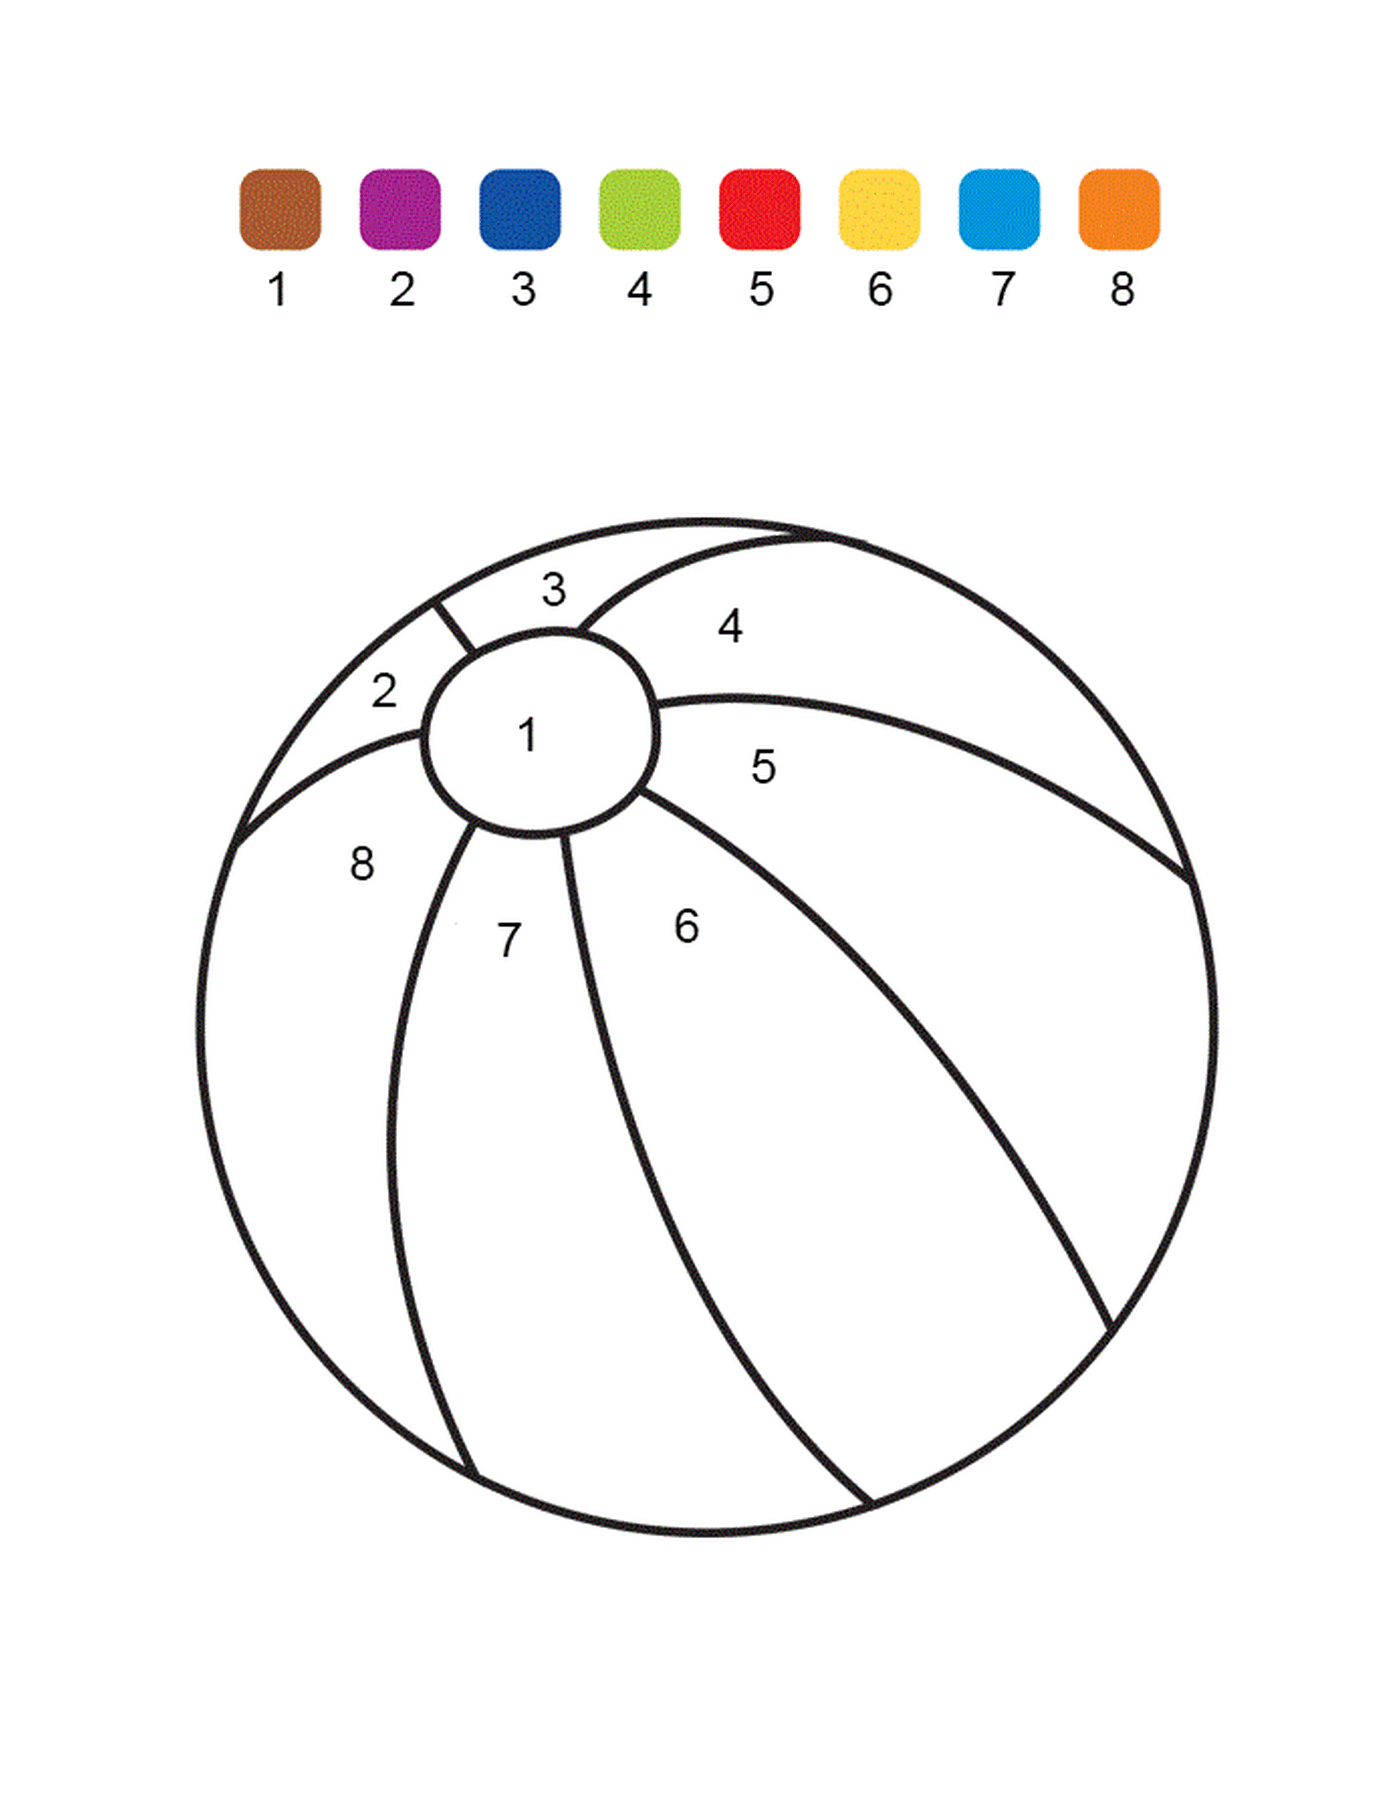  A colorful numbered ball 